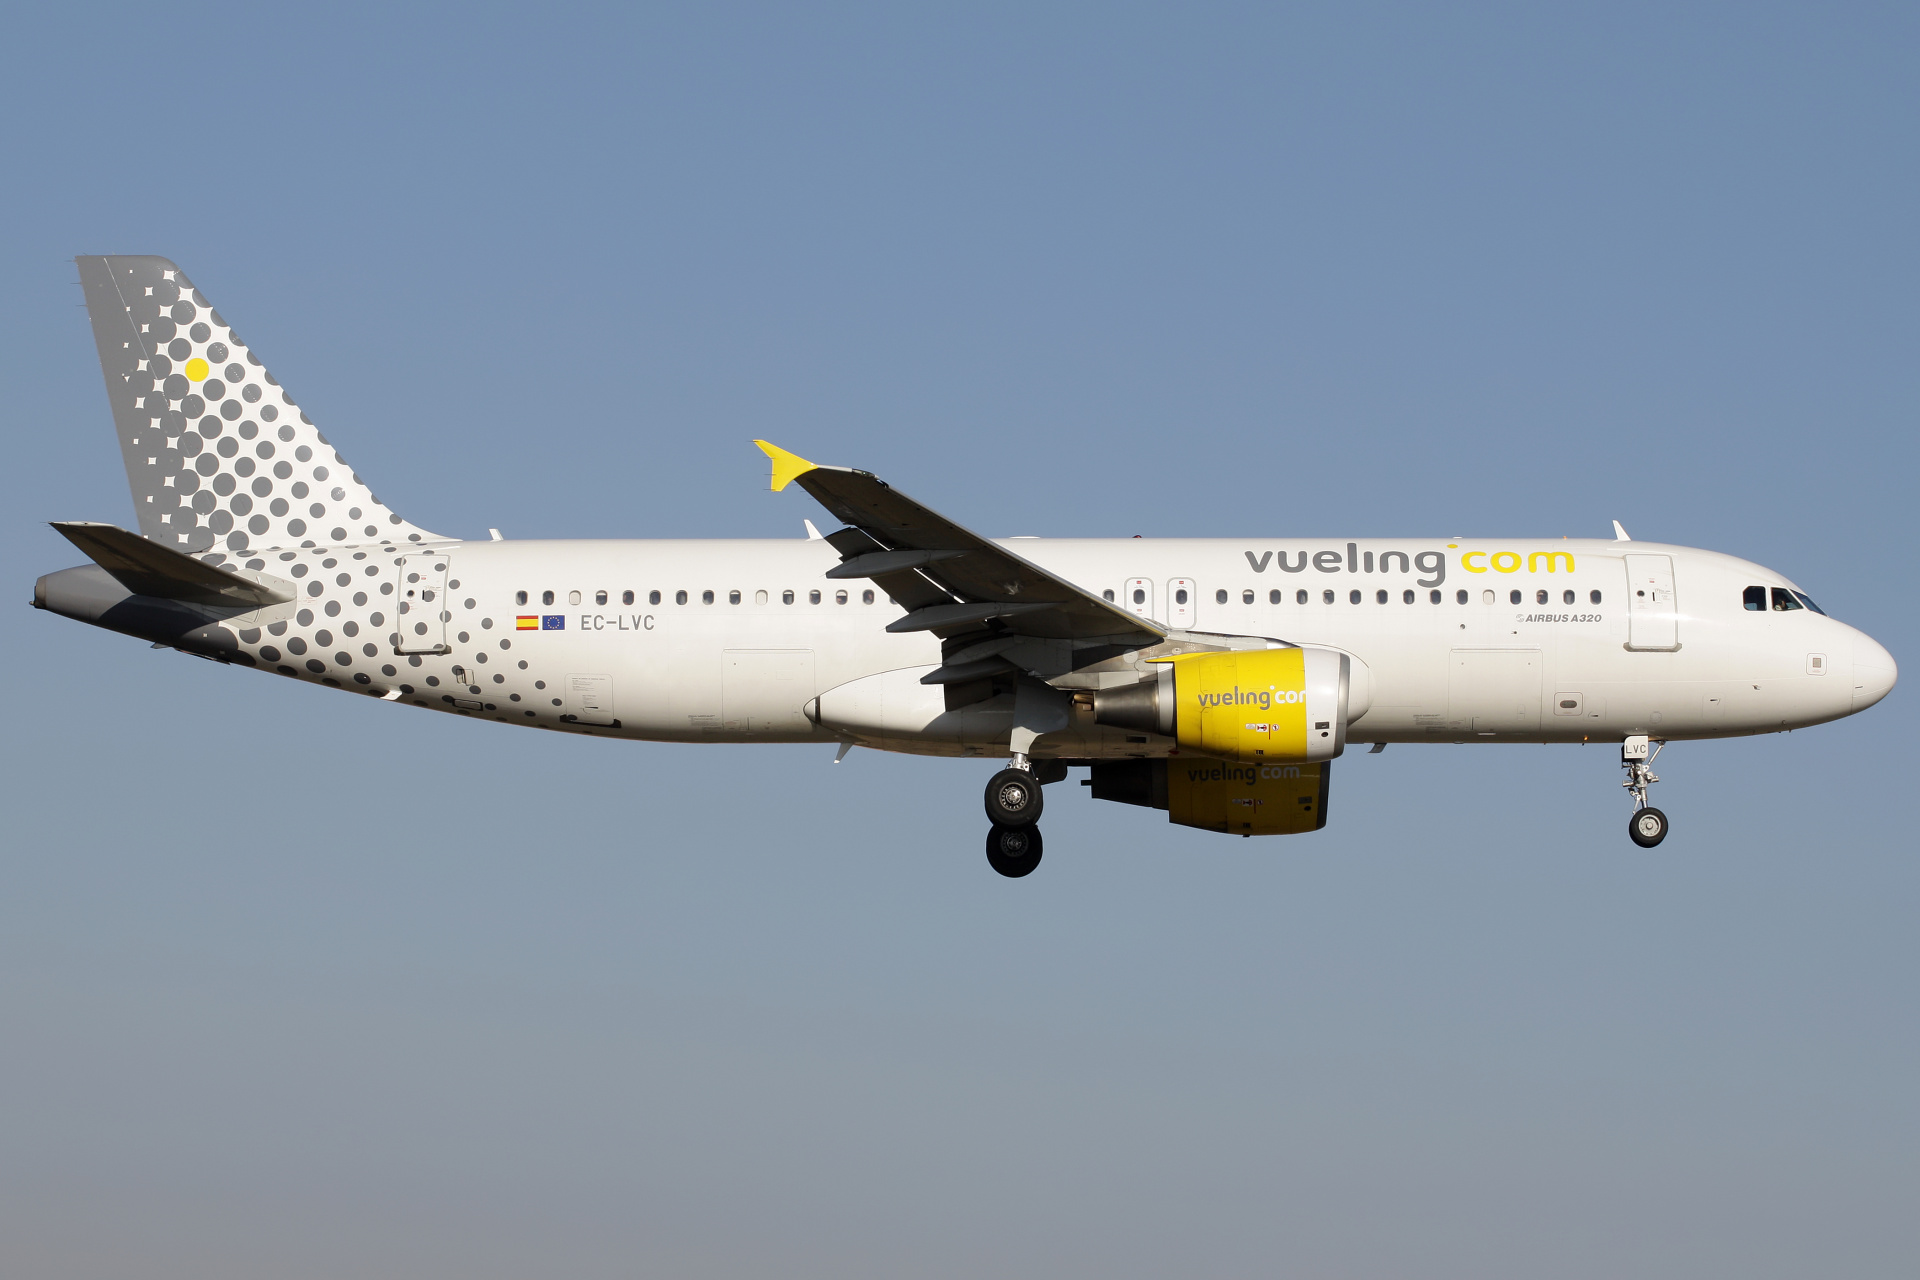 EC-LVC (Aircraft » EPWA Spotting » Airbus A320-200 » Vueling Airlines)